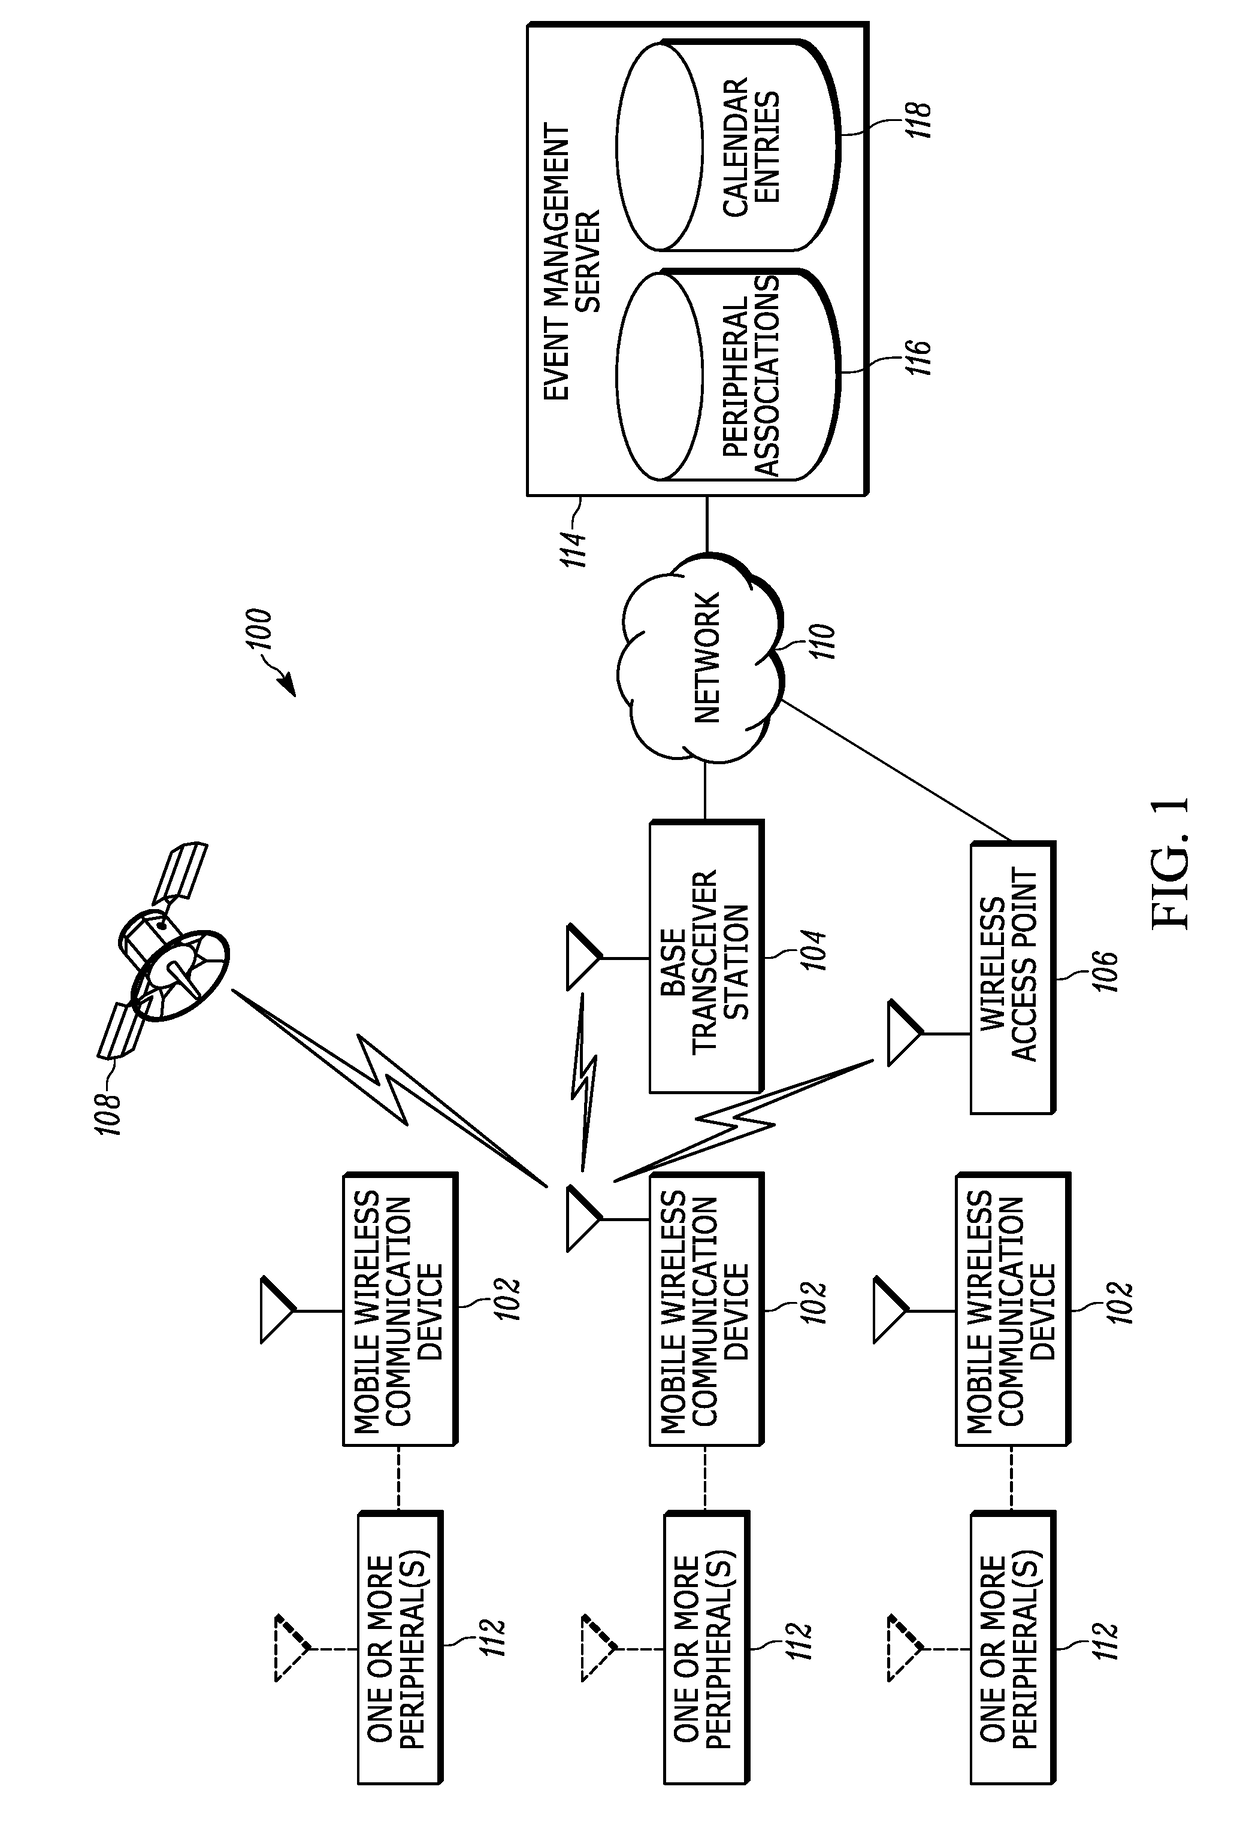 Mobile Wireless Communication System, Network and Method for Managing the Use of a Peripheral in Connection with an Upcoming Event